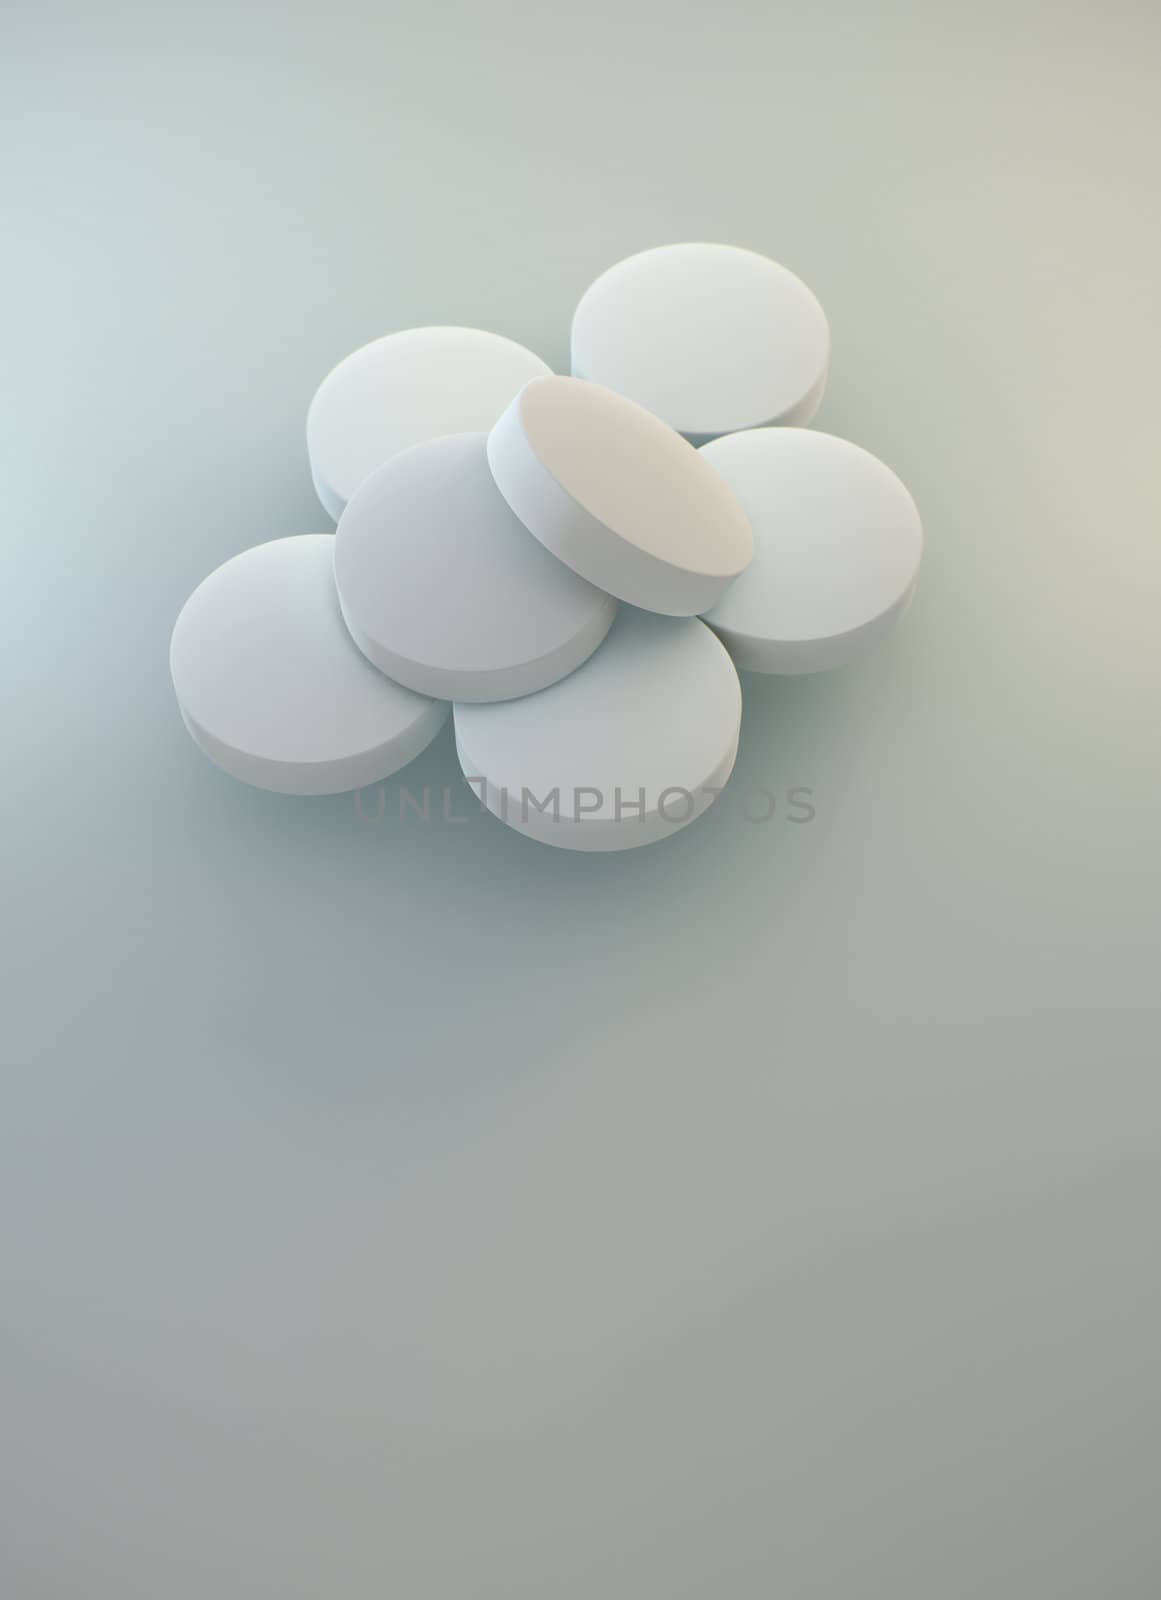 Few pharmaceutical white tablets on neutral background with soft shadows. 3D rendering realistic illustration.